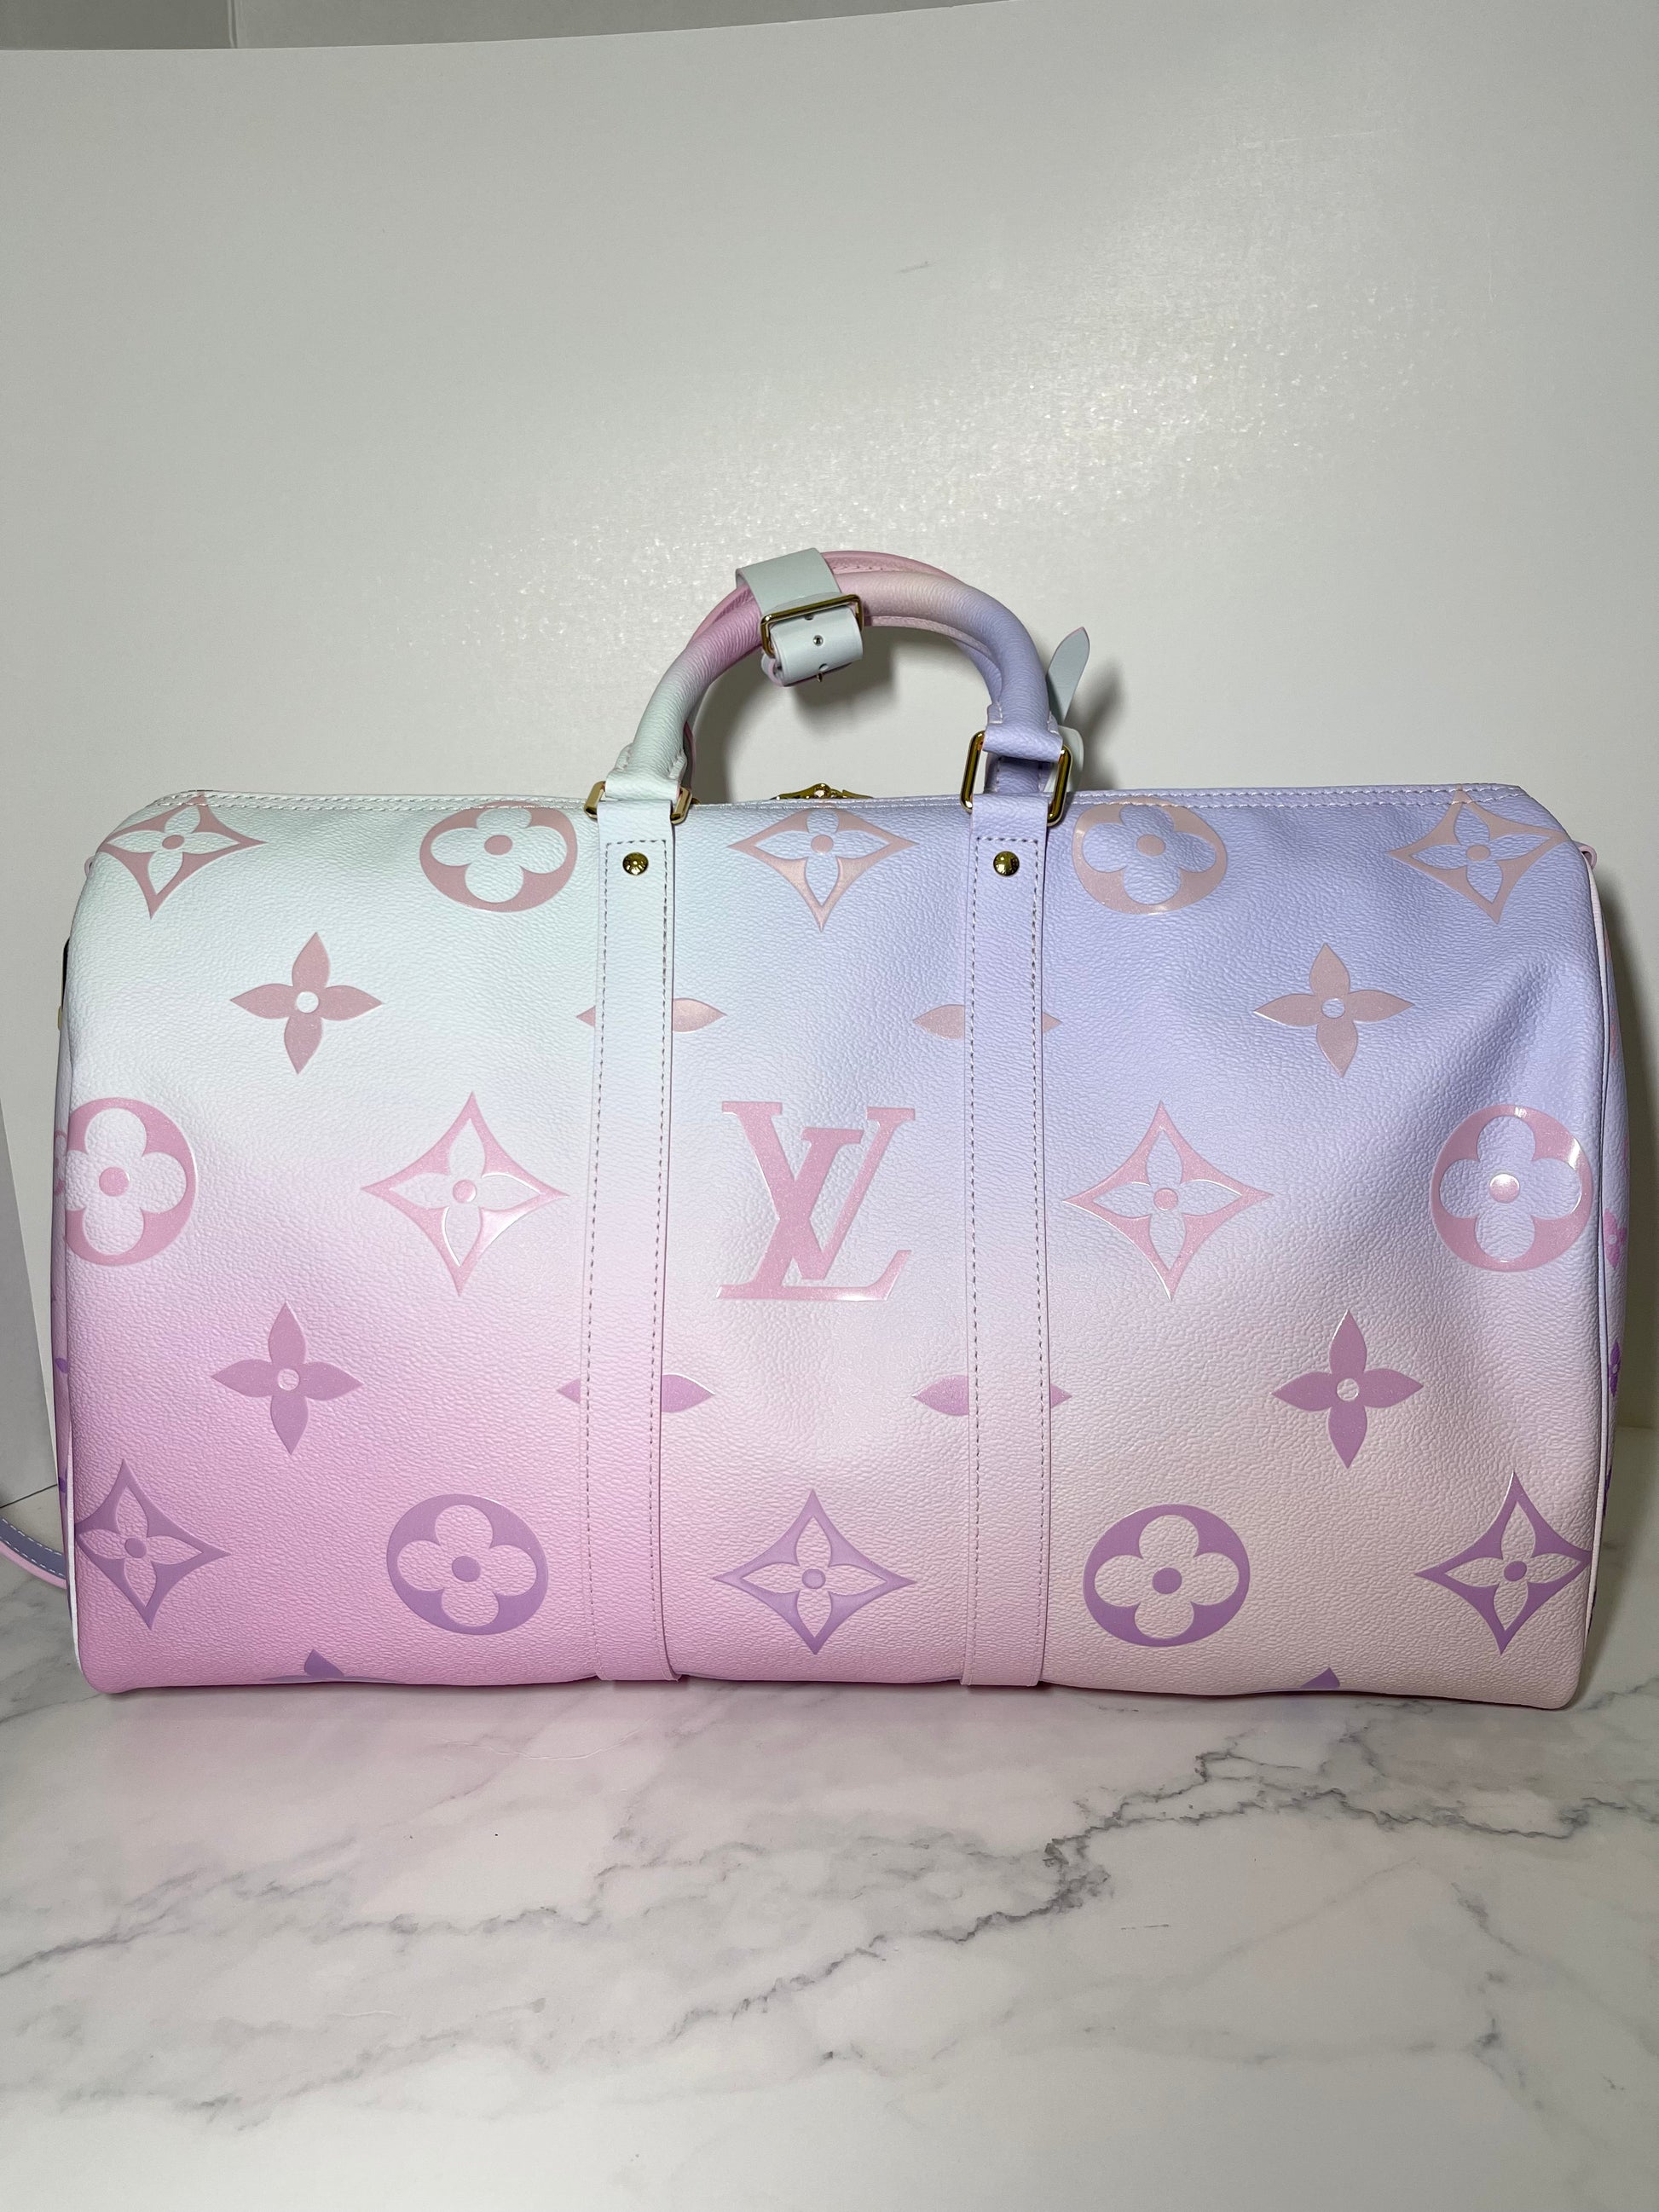 Welcome home to my new sunrise pastel keepall 45 from the Spring